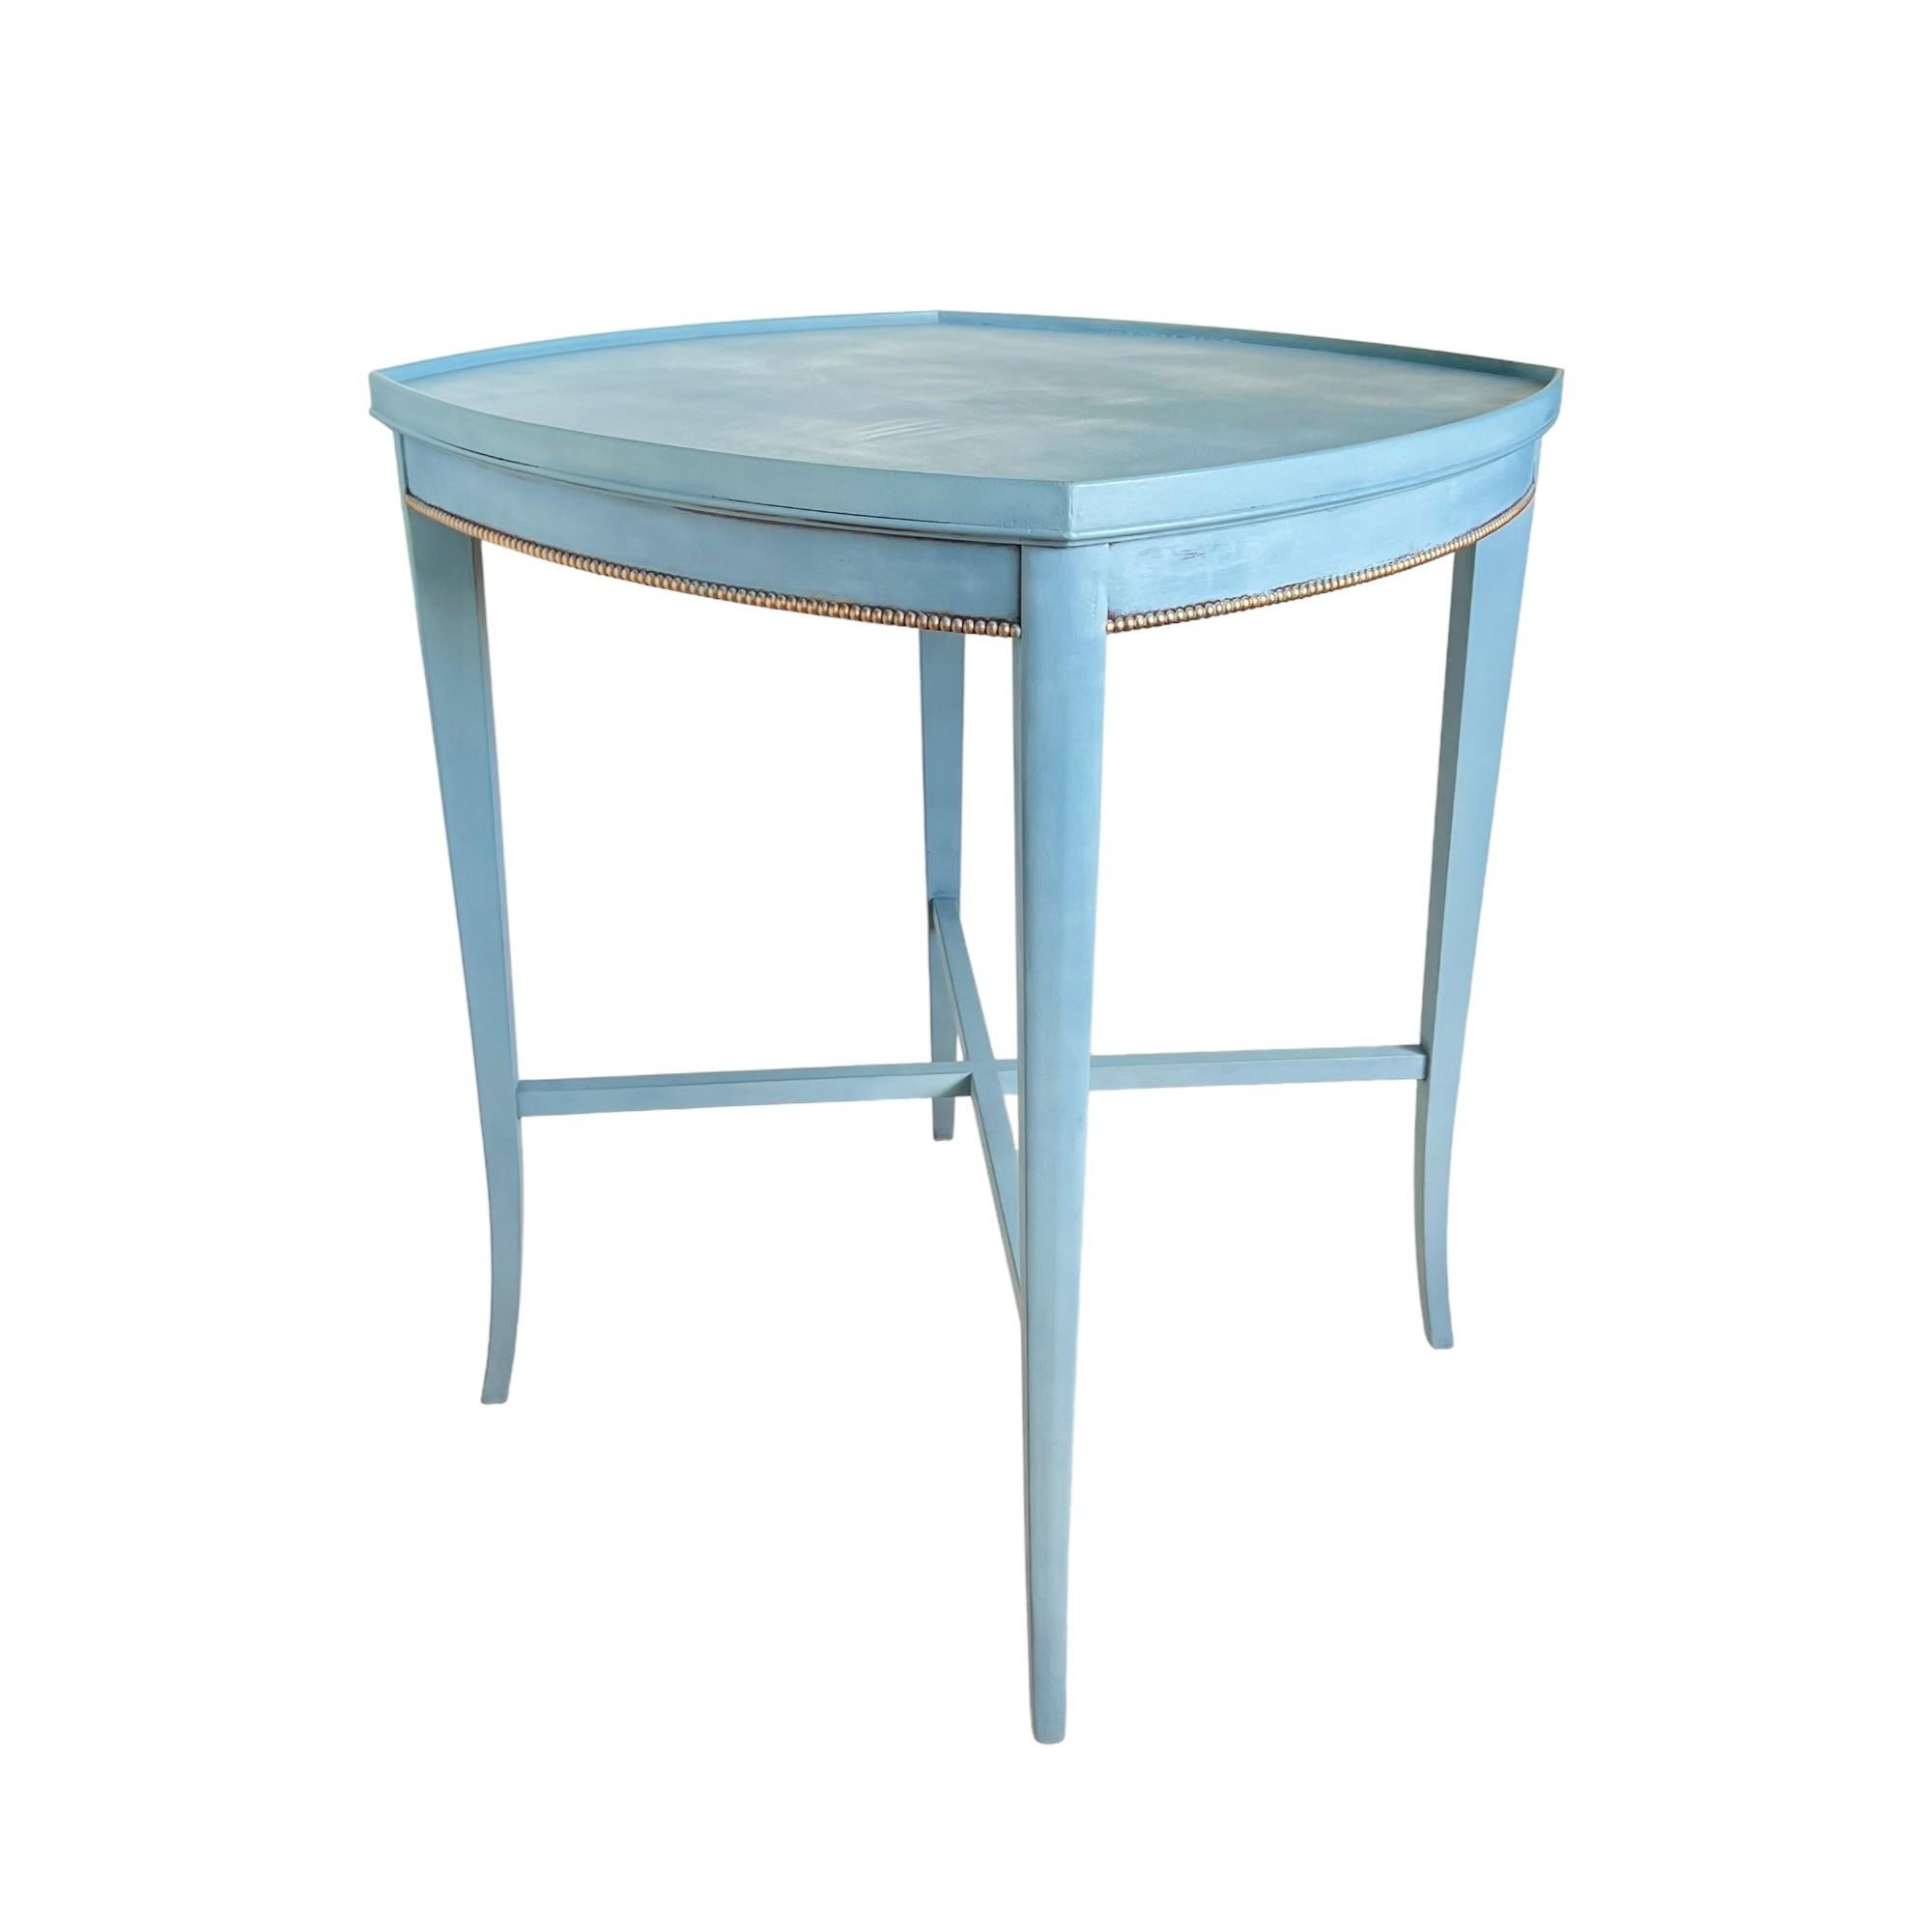 French Provincial Vintage Refinished French Blue Side Table with Gold Bead Edge